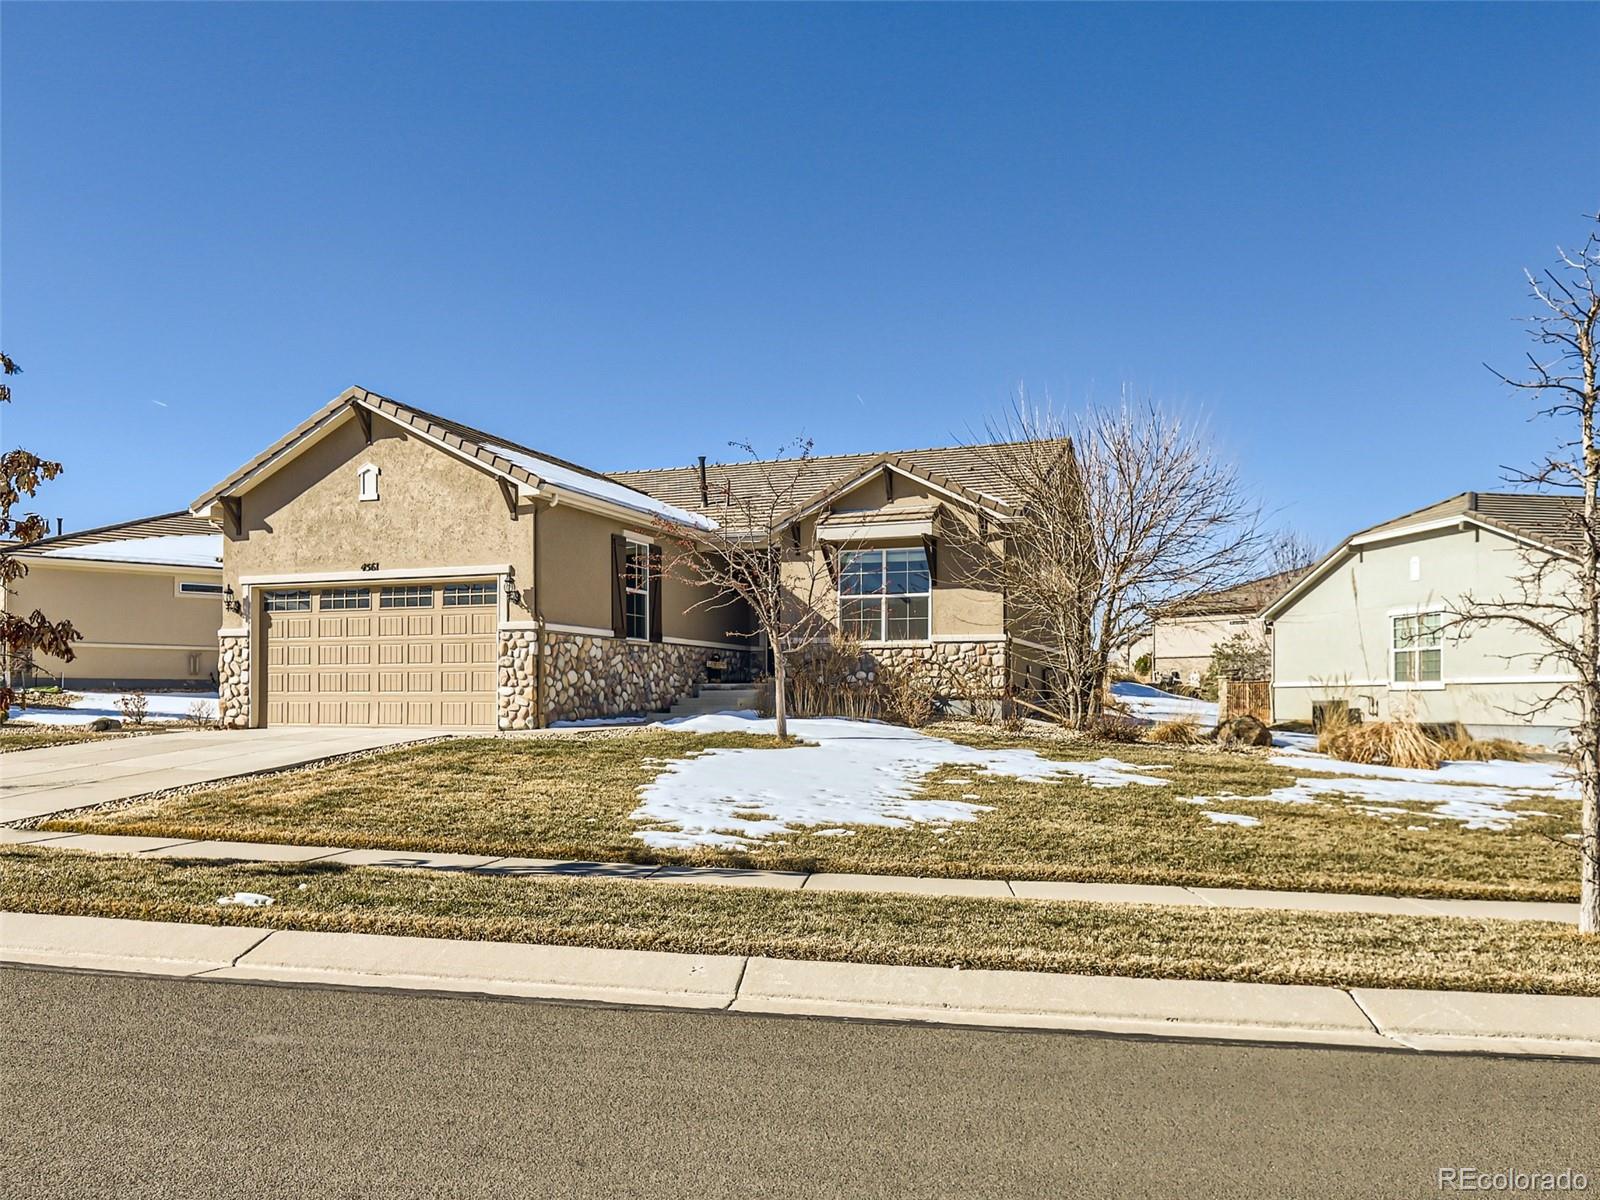 Report Image for 4561  Hope Circle,Broomfield, Colorado